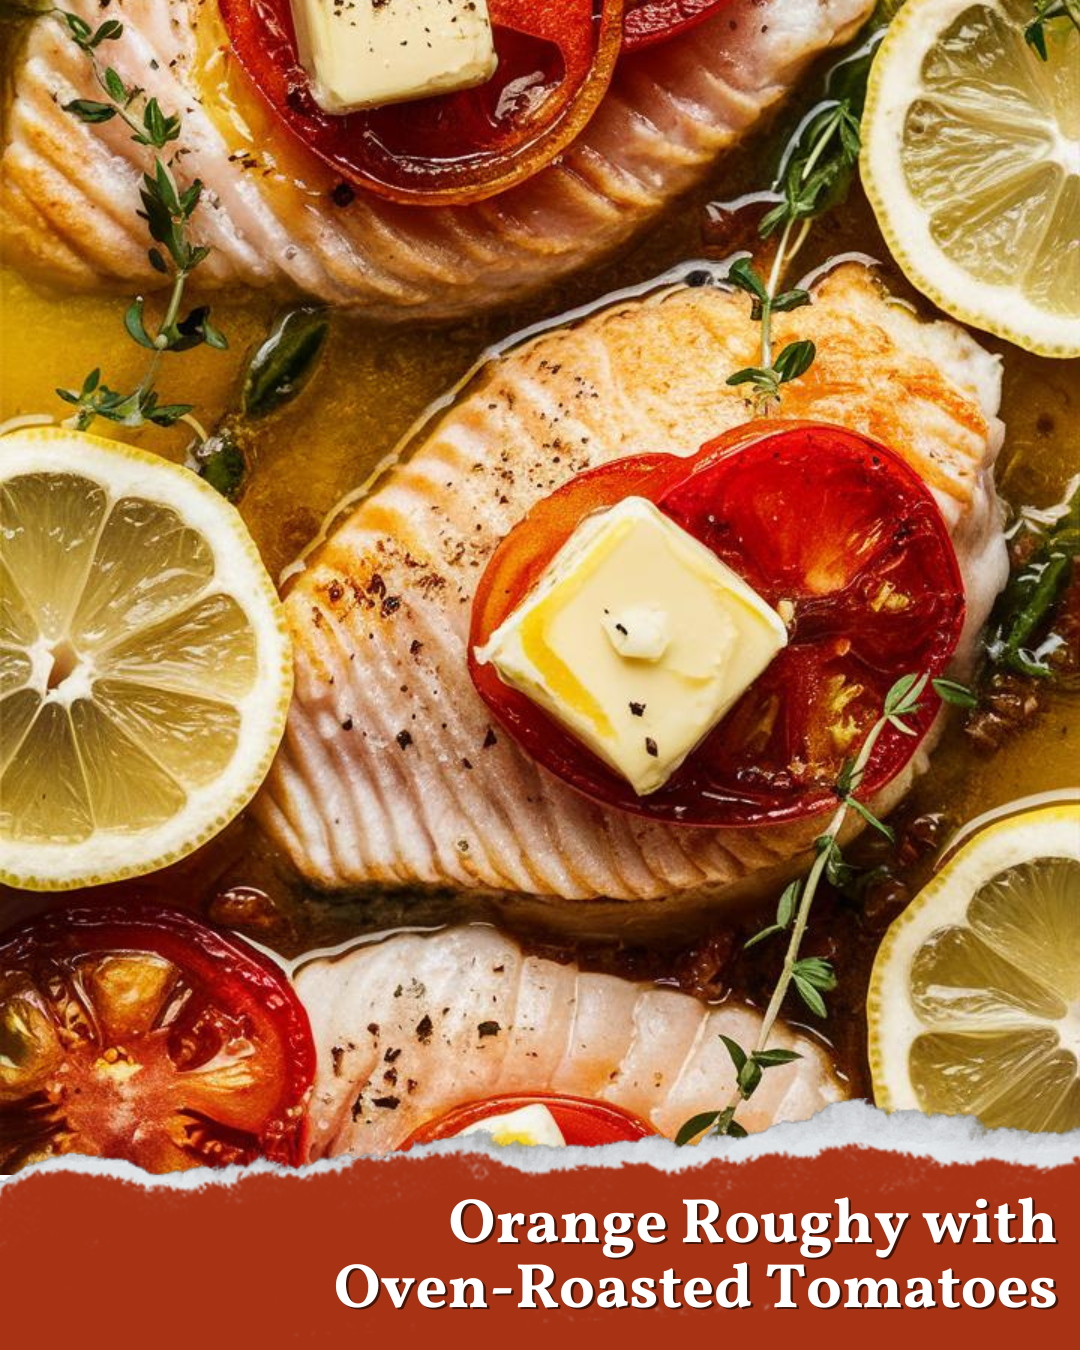 Foil packet cooking is your summer hero! Grill or bake this Orange Roughy with Oven-Roasted Tomatoes for a light, healthy meal ready in under 30 minutes. Cleanup? Just toss the foil! Perfect for hot days or year-round quick dinners. 🐟🔥 #HealthyEating #EasyMeals